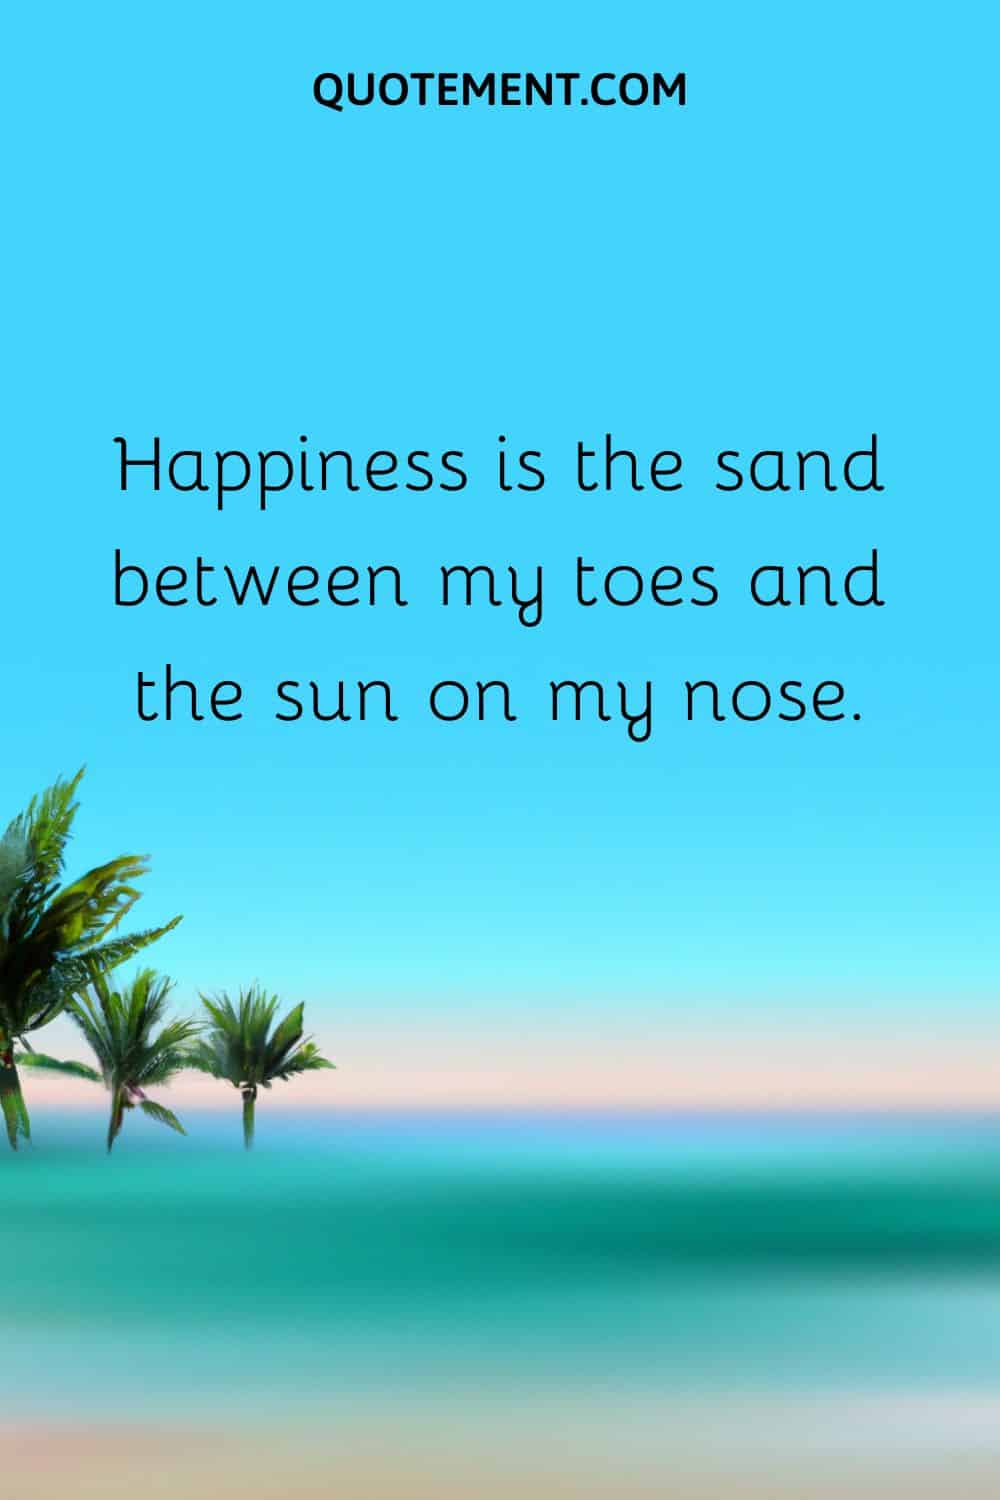 Happiness is the sand between my toes and the sun on my nose